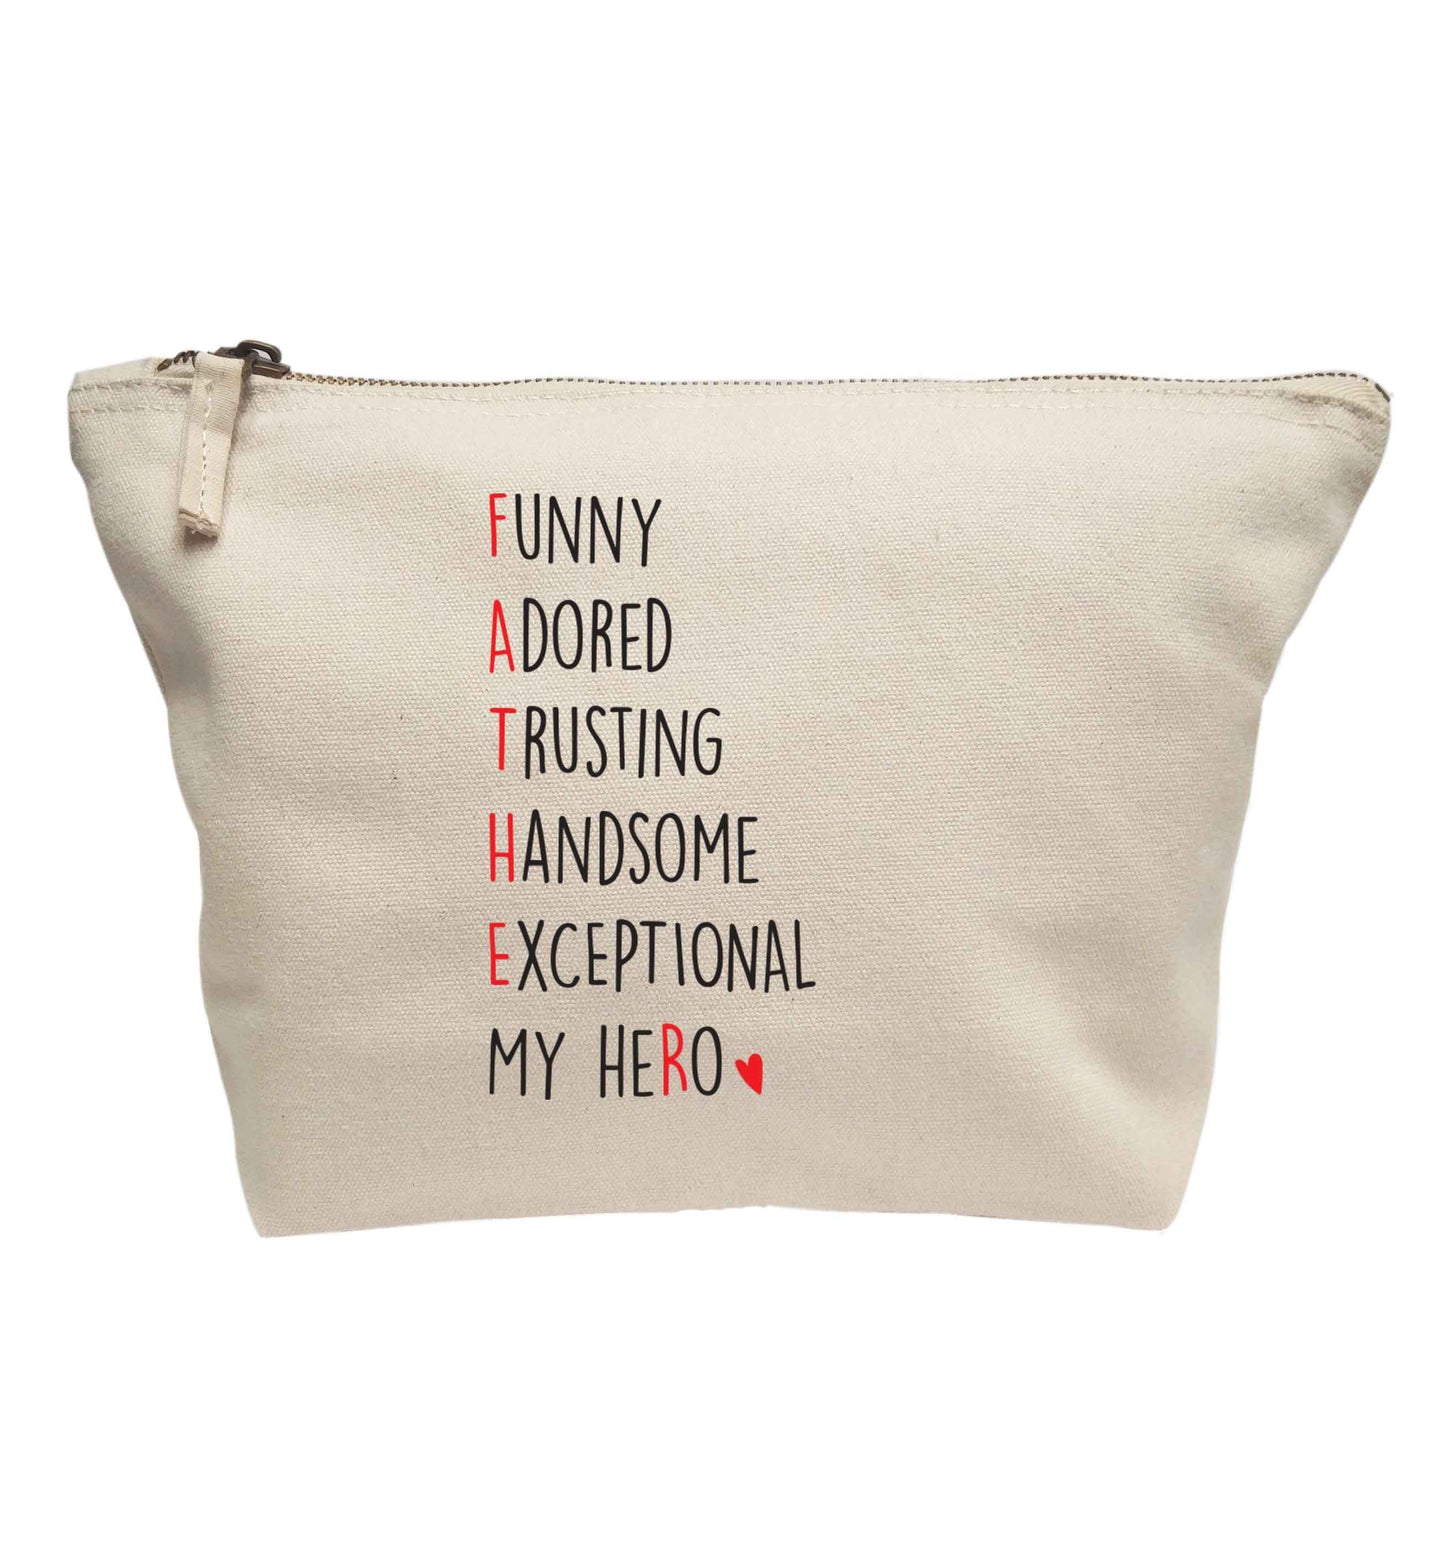 Father, funny adored trusting handsome exceptional my hero | Makeup / wash bag